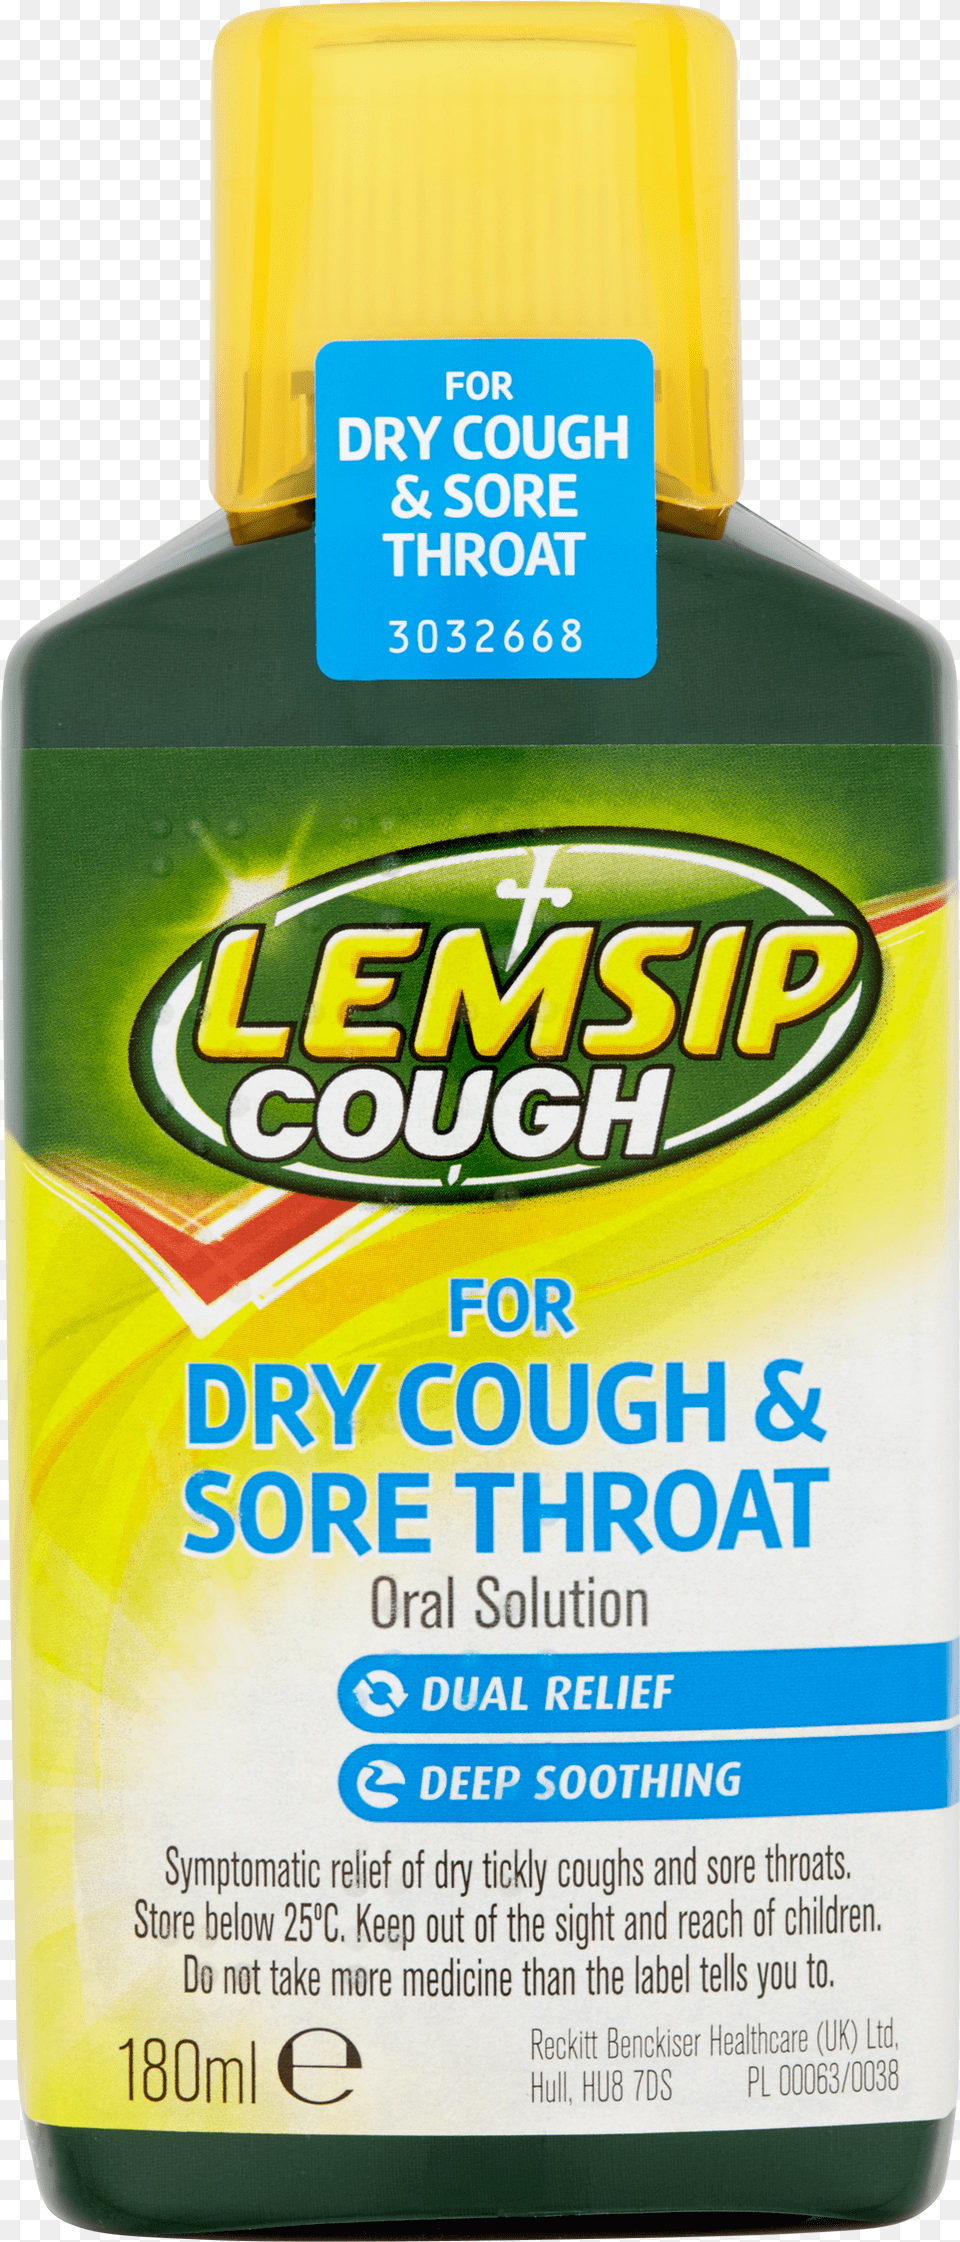 Lemsip Cough For Dry Cough Amp Sore Throat 180ml Lemsip Cough And Sore Throat, Bottle, Cosmetics, Sunscreen Free Png Download